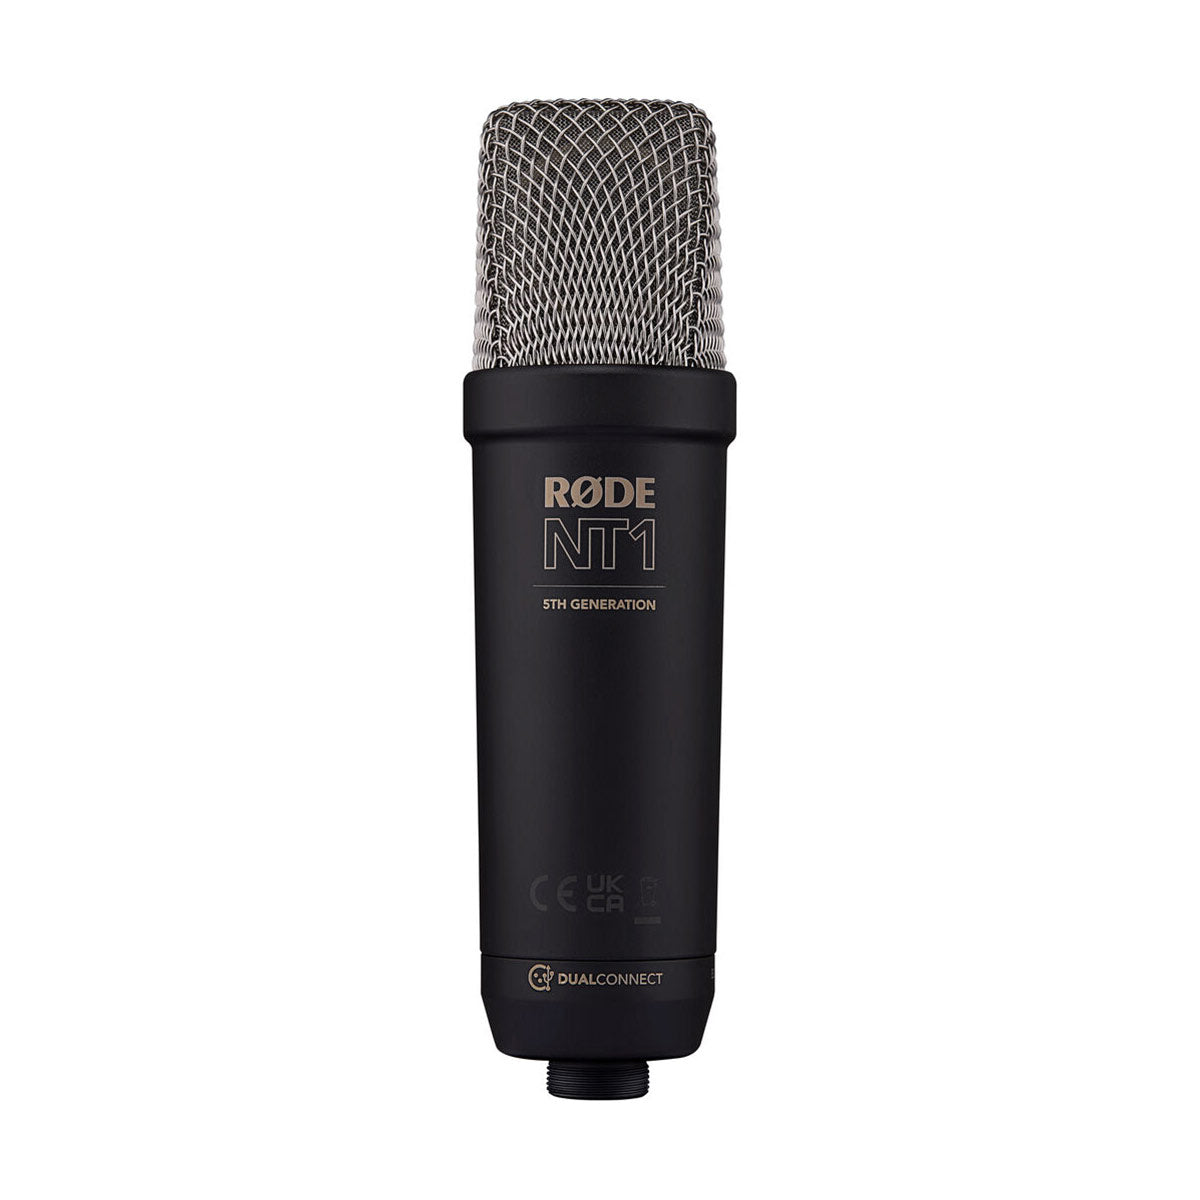 Rode NT1 fifth-gen microphone review: USB output added to pro-level mic -  General Discussion Discussions on AppleInsider Forums